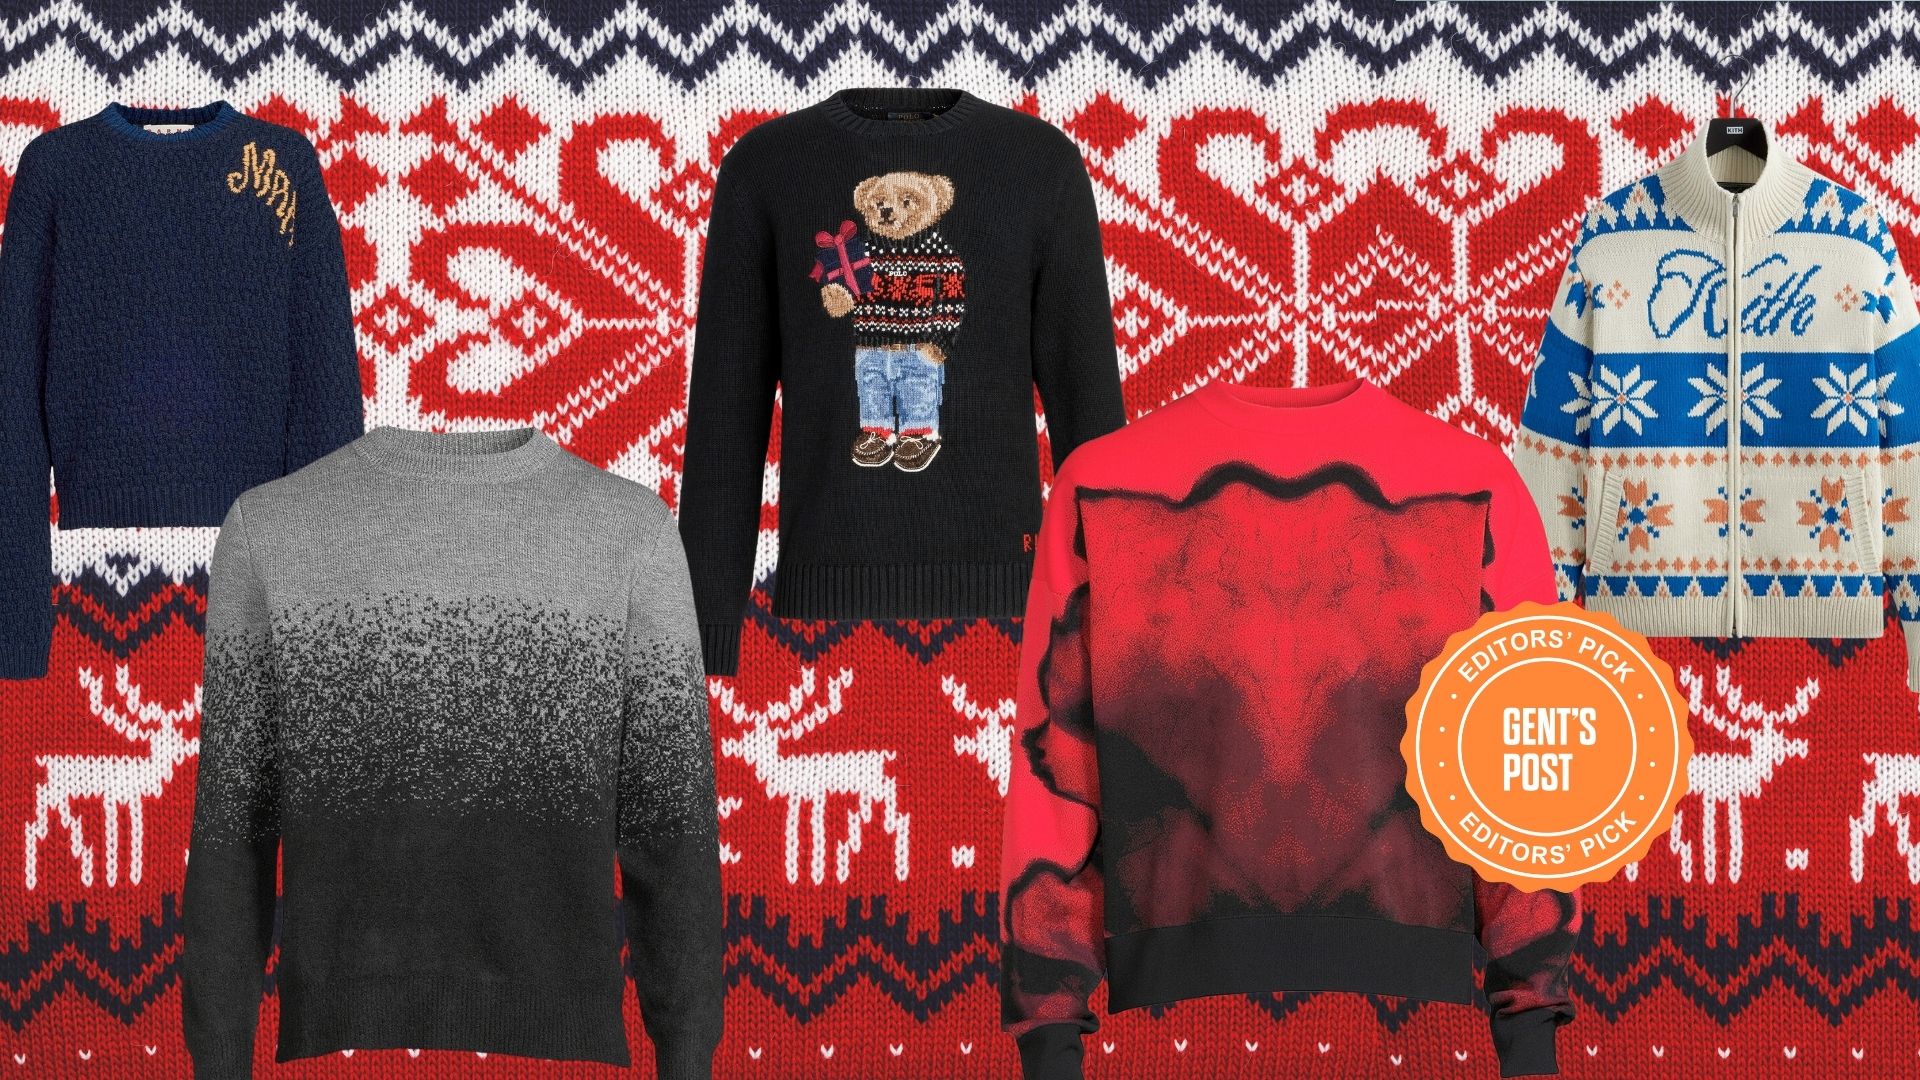 Editors' Picks: Who needs an ugly Christmas sweater when you have